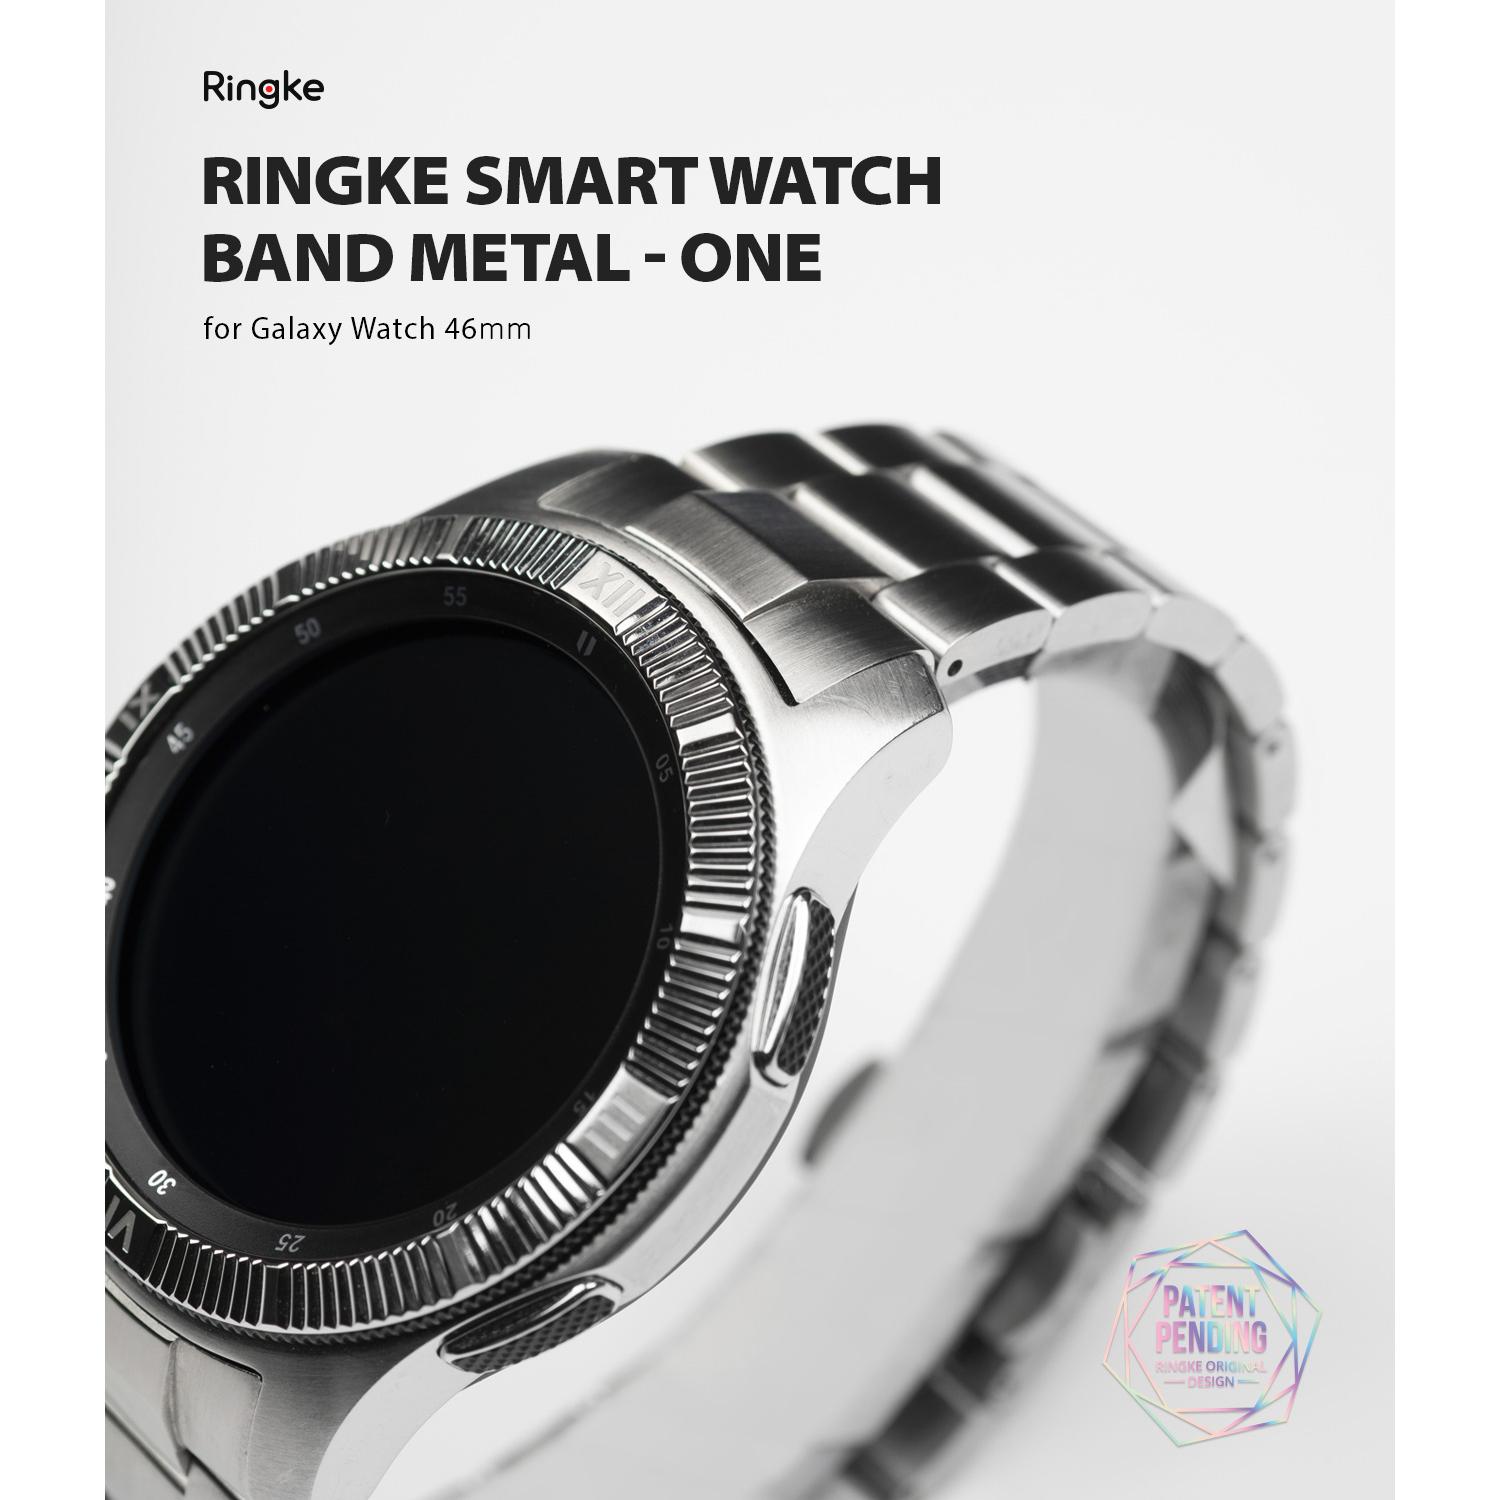 Ringke Galaxy Watch 4 Classic 42mm Band Metal One, Stainless Steel Smartwatch Band Replacement - Silver